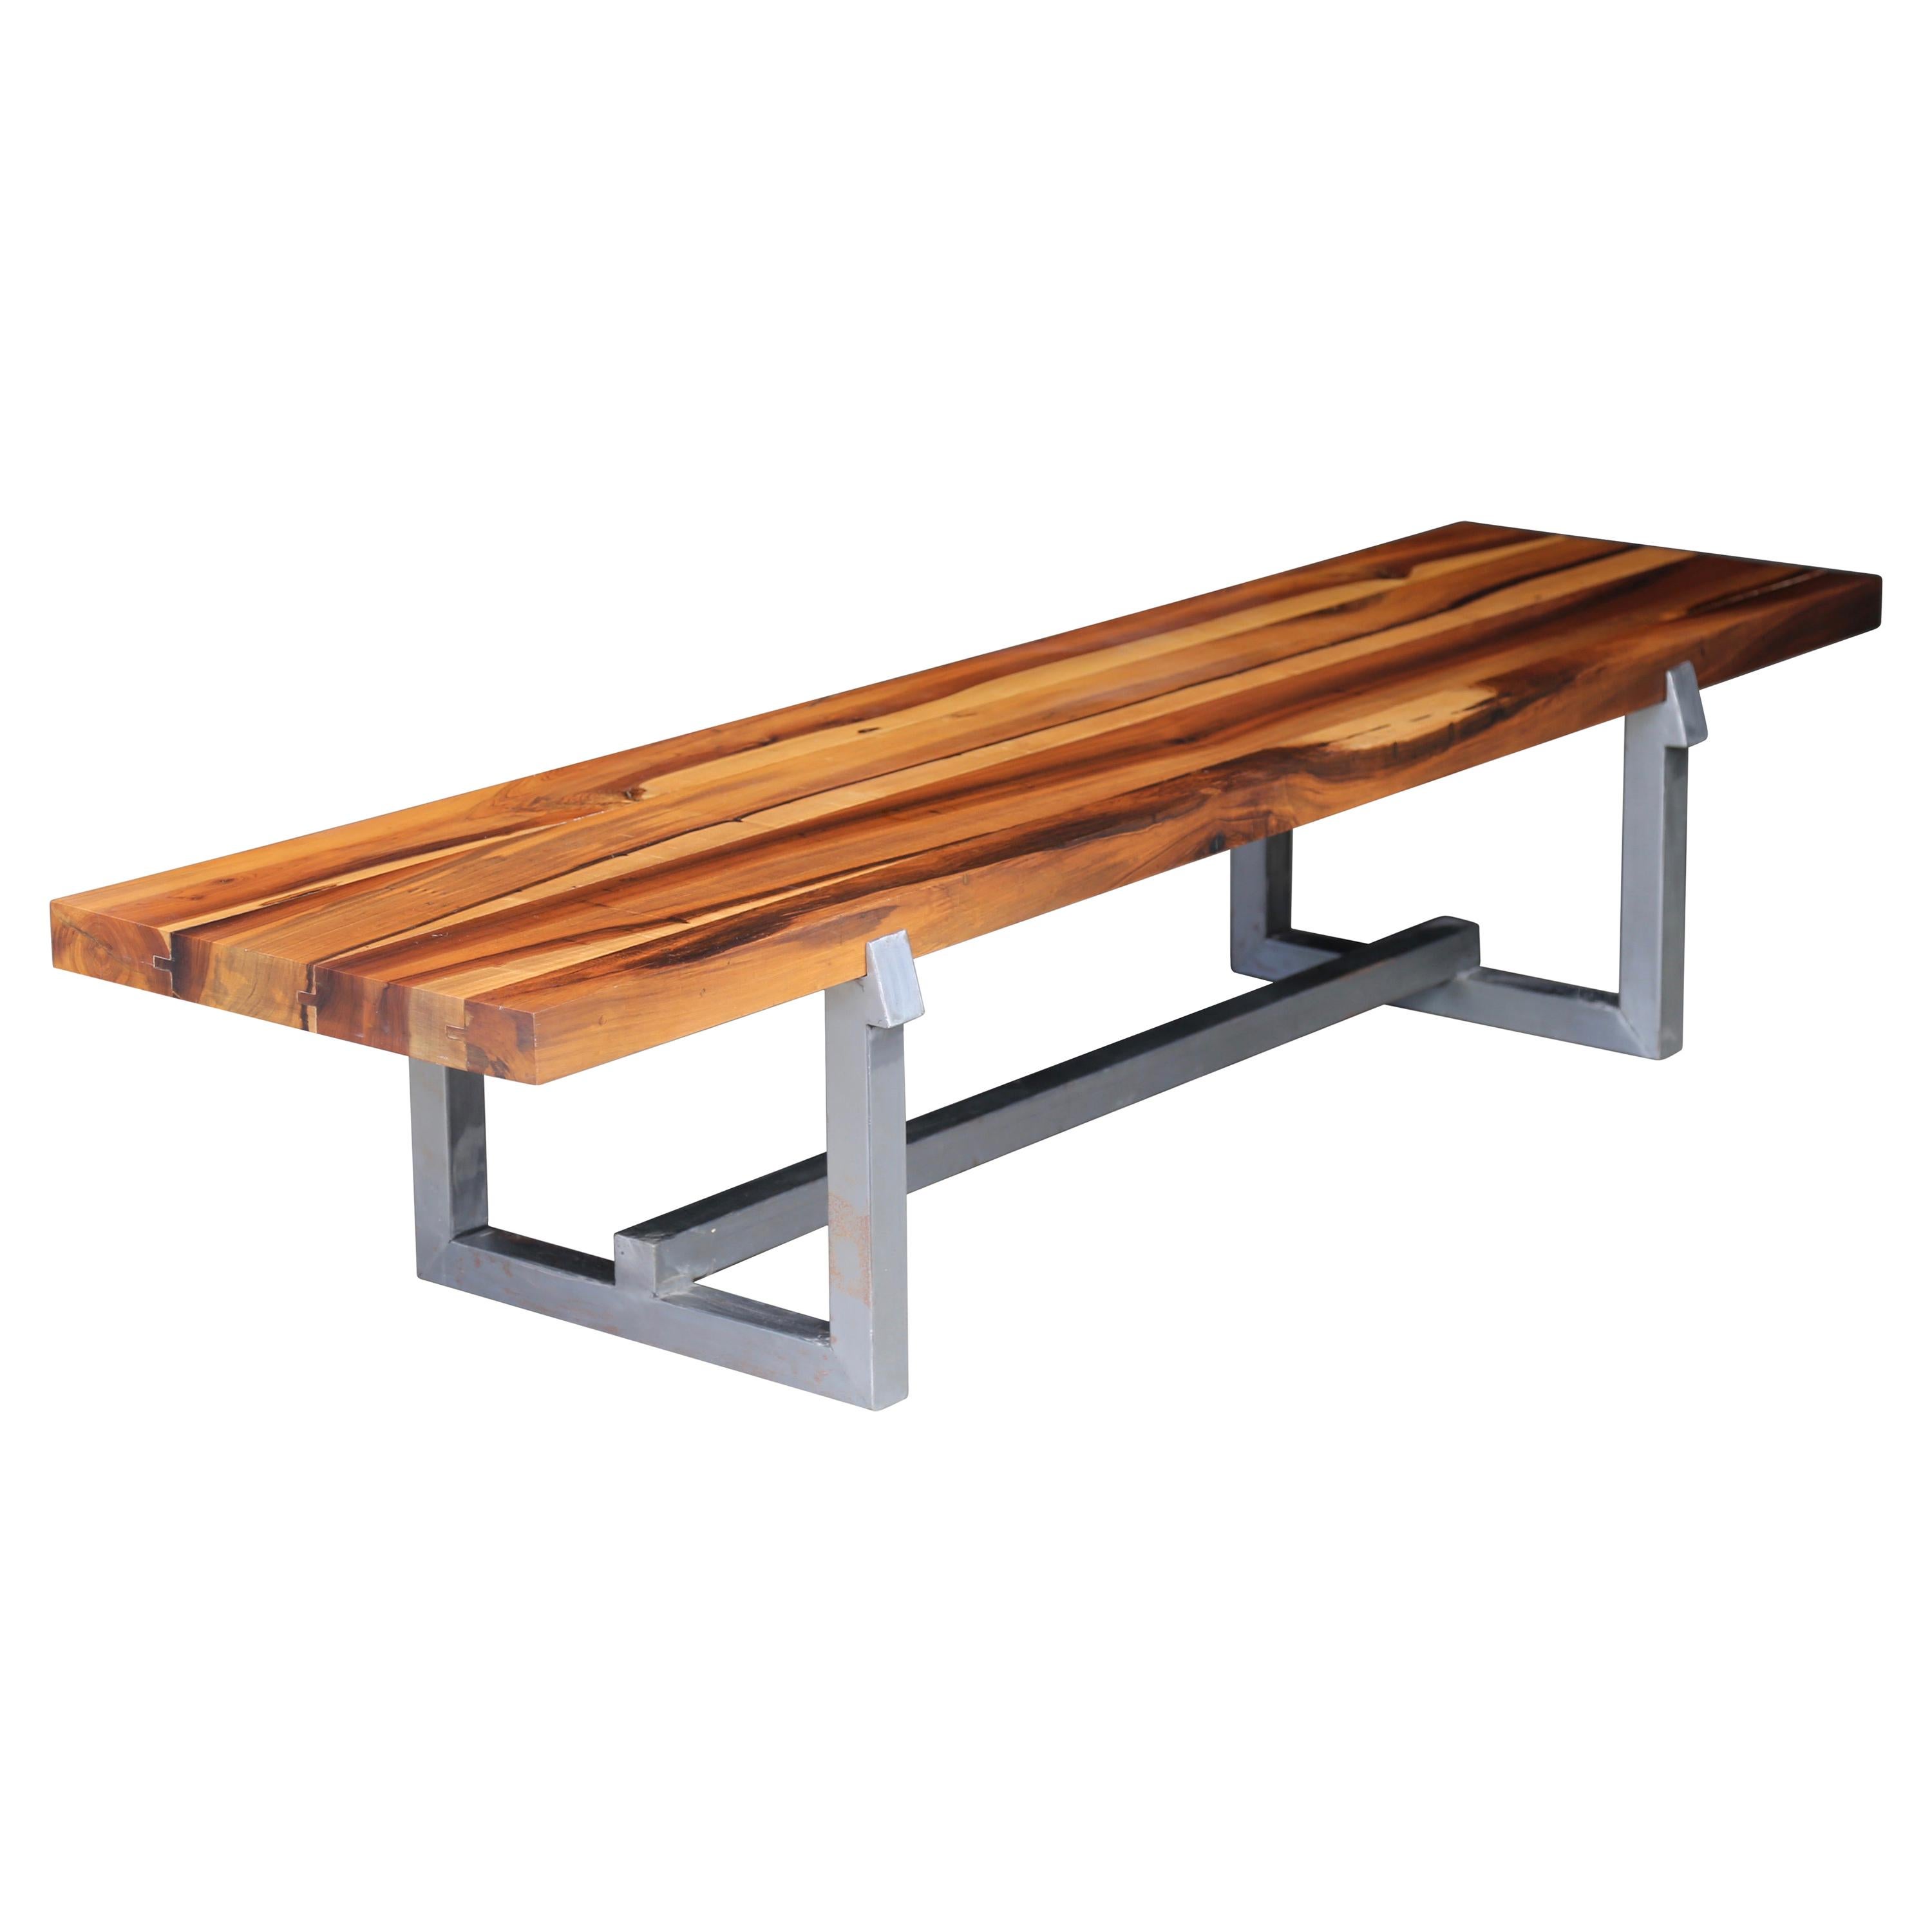 Exotic Wood and Steel Custom Bench from Costantini, Donato 'In Stock'